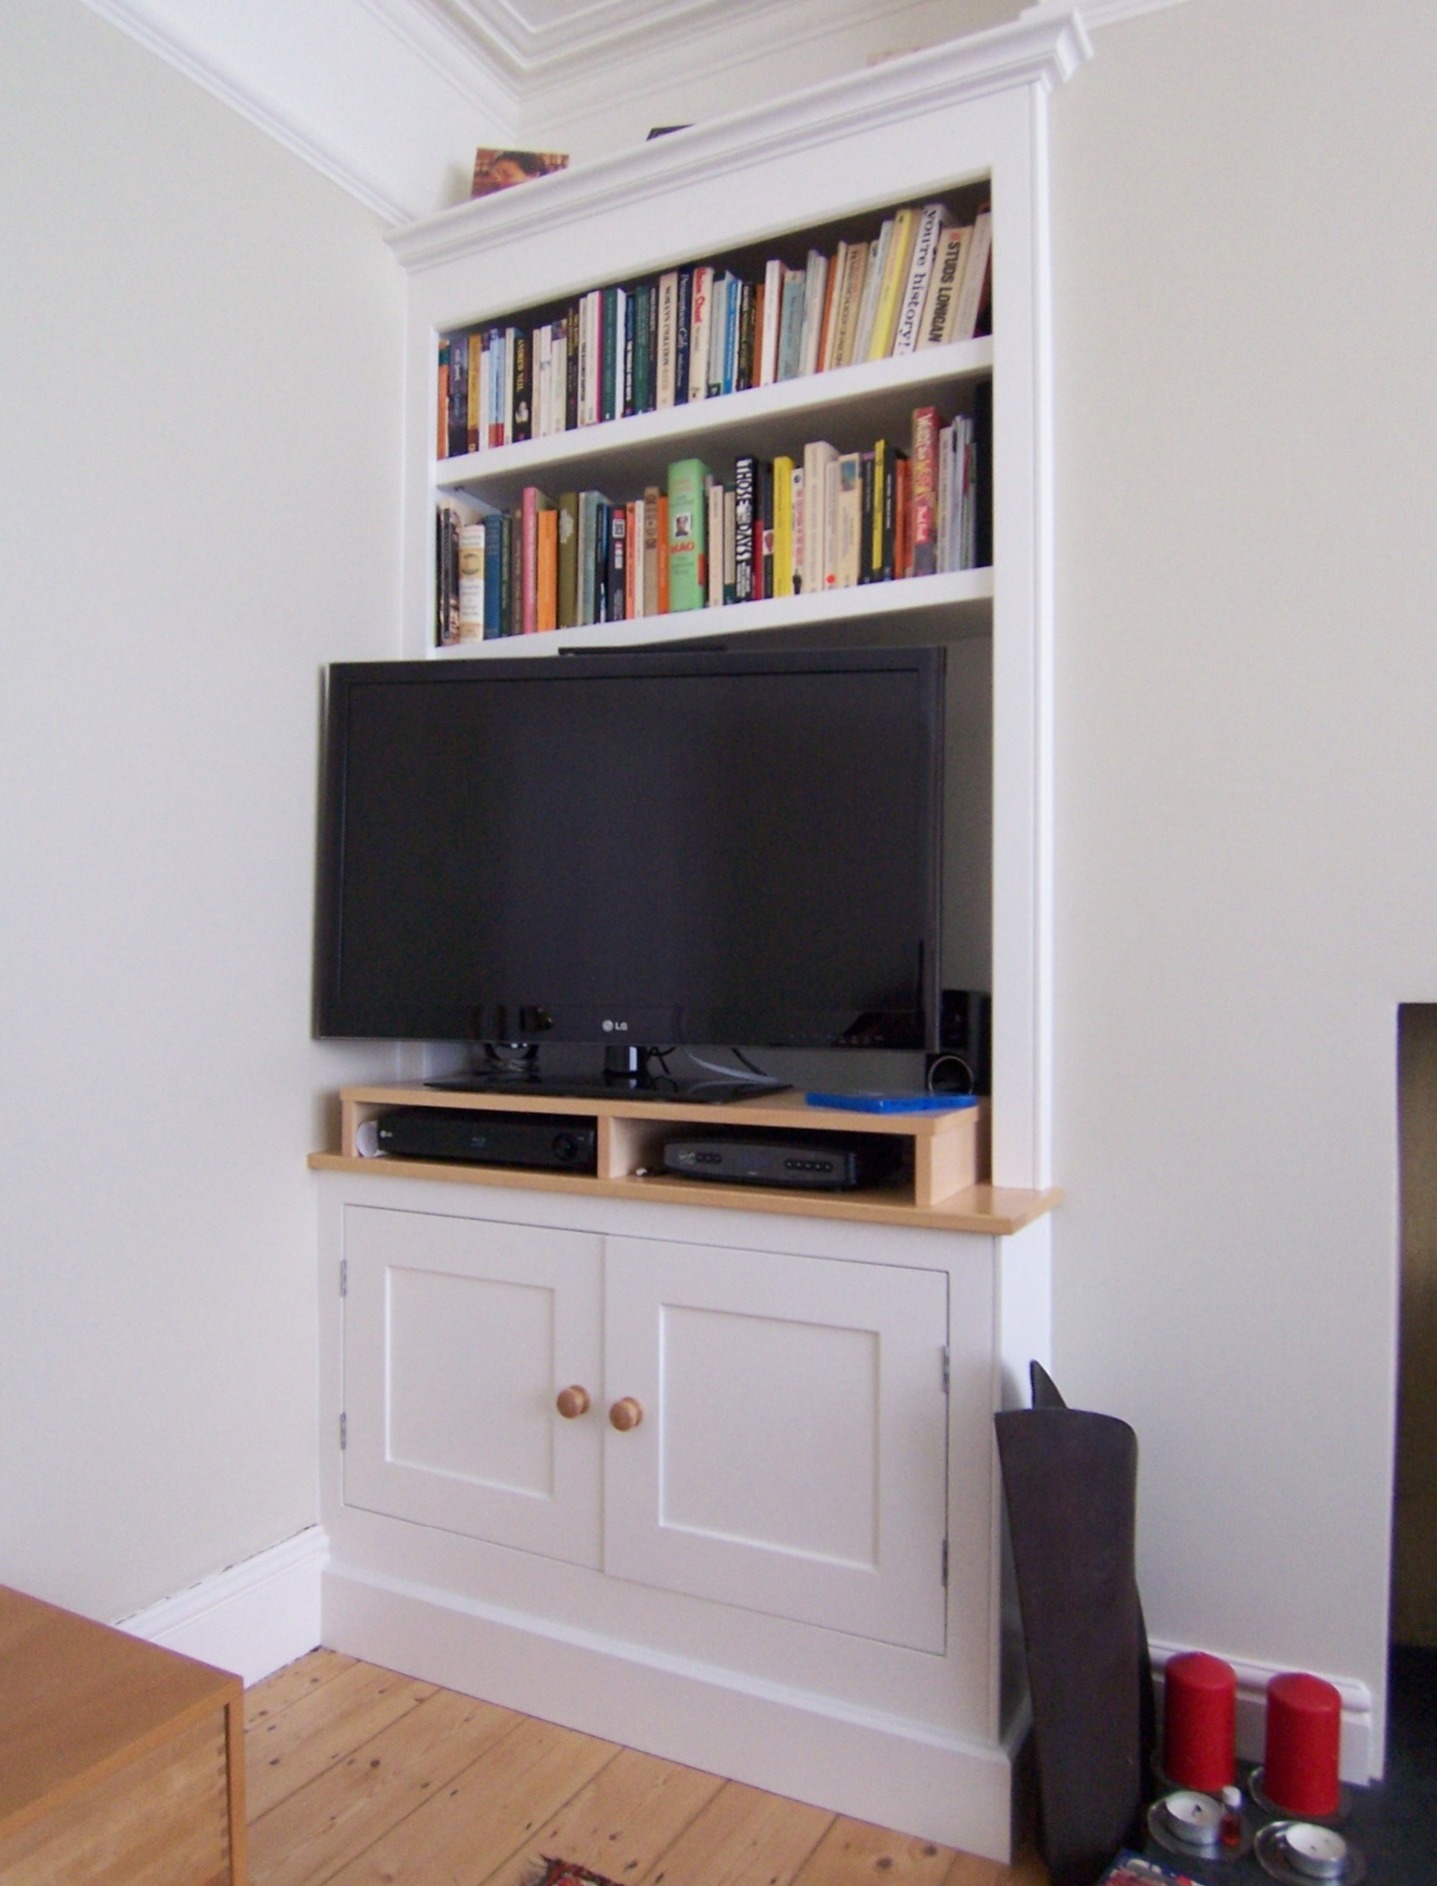 In-frame bookcase and cupboard